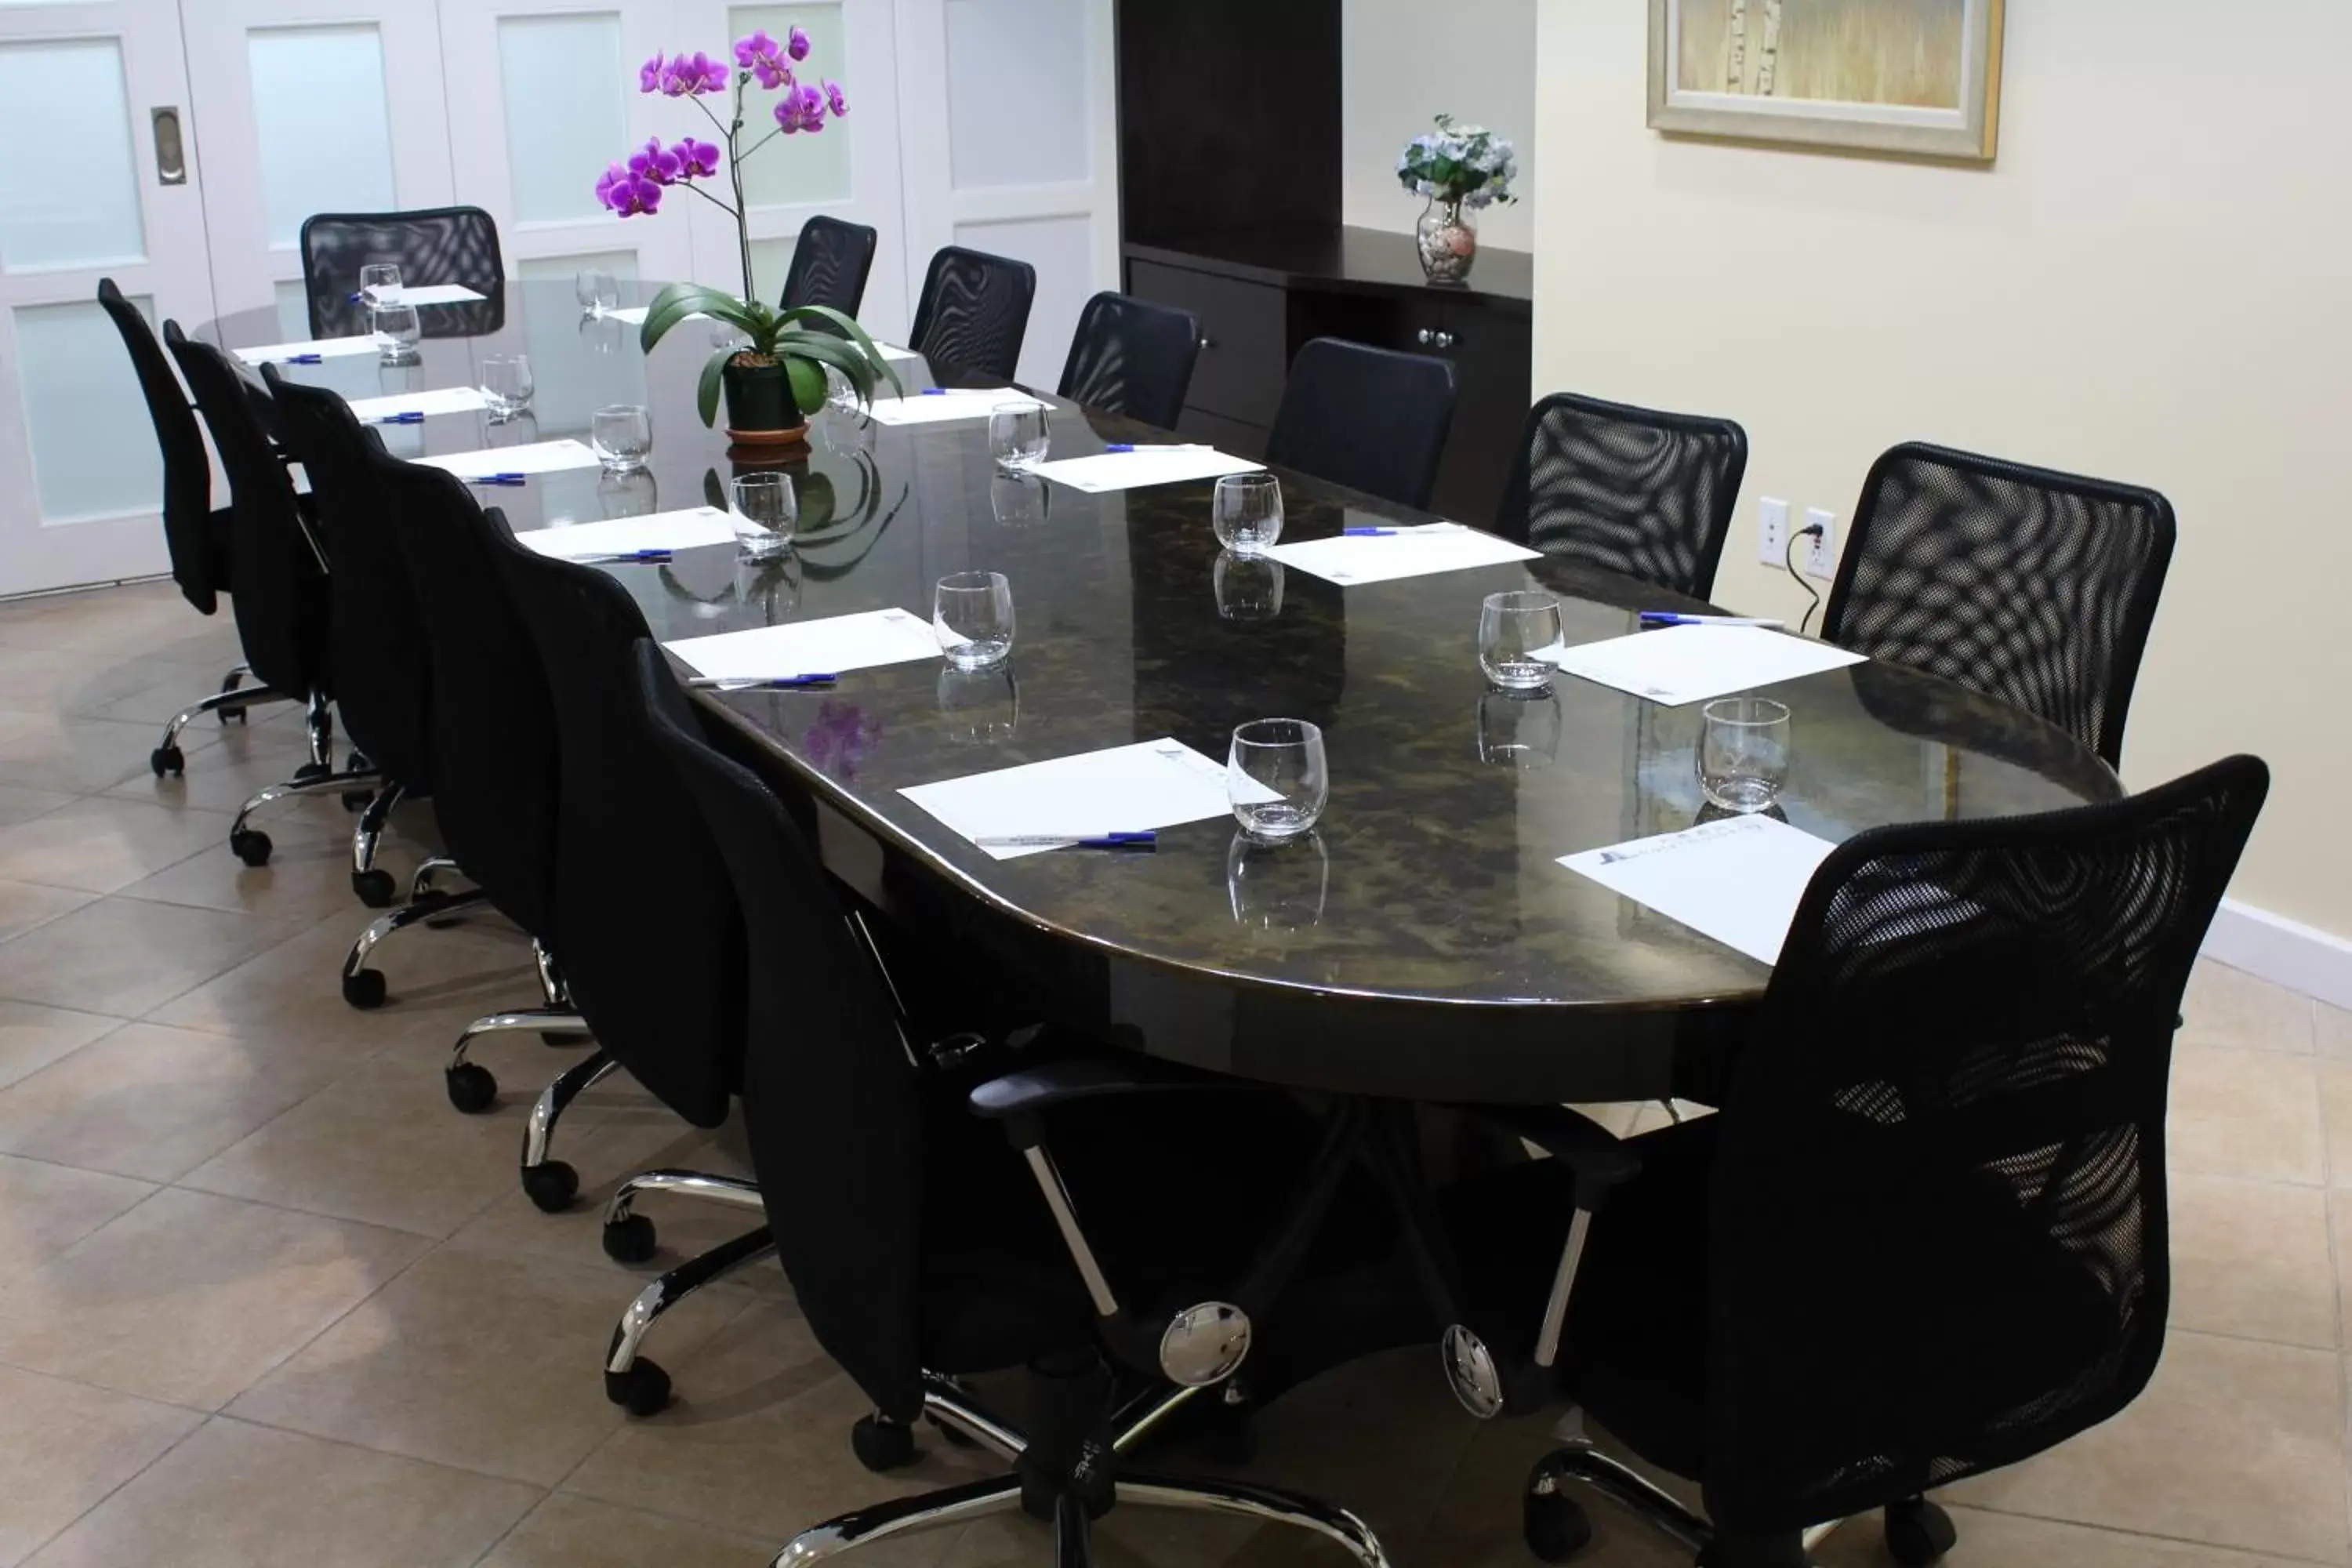 Business facilities in Hotel Mulberry